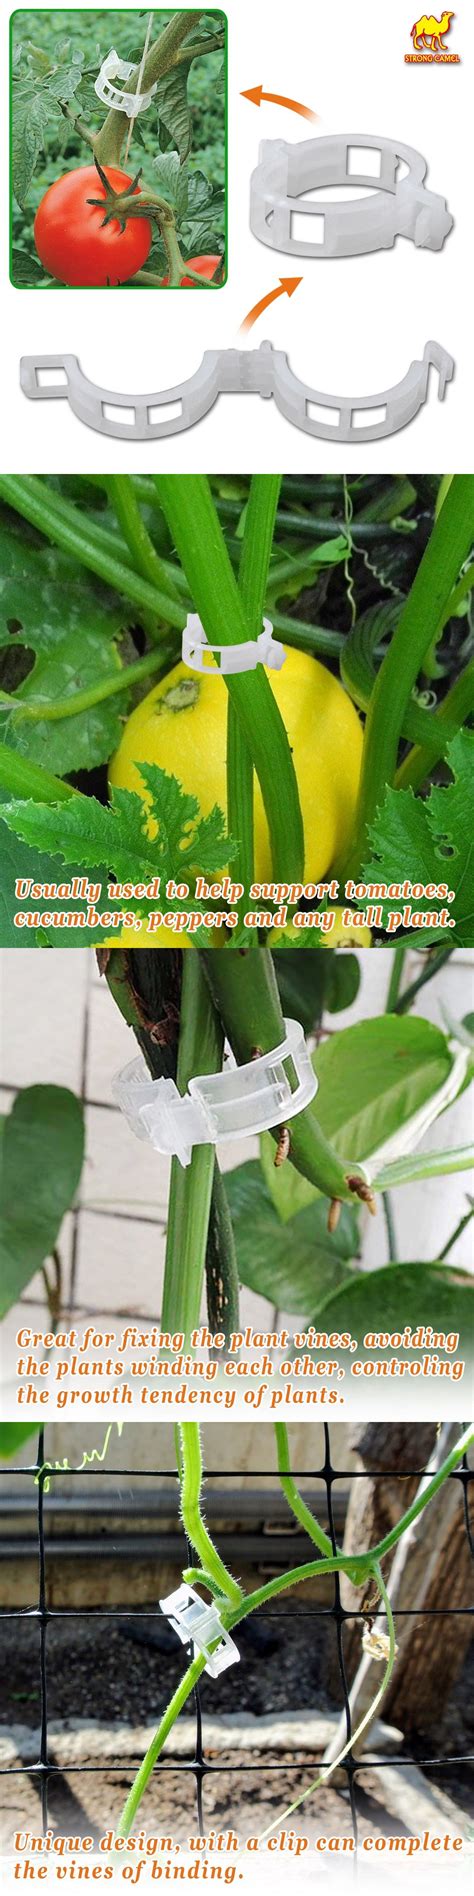 Plant Ties And Supports 181001 Plant Support Garden Clips 25mm Tomato